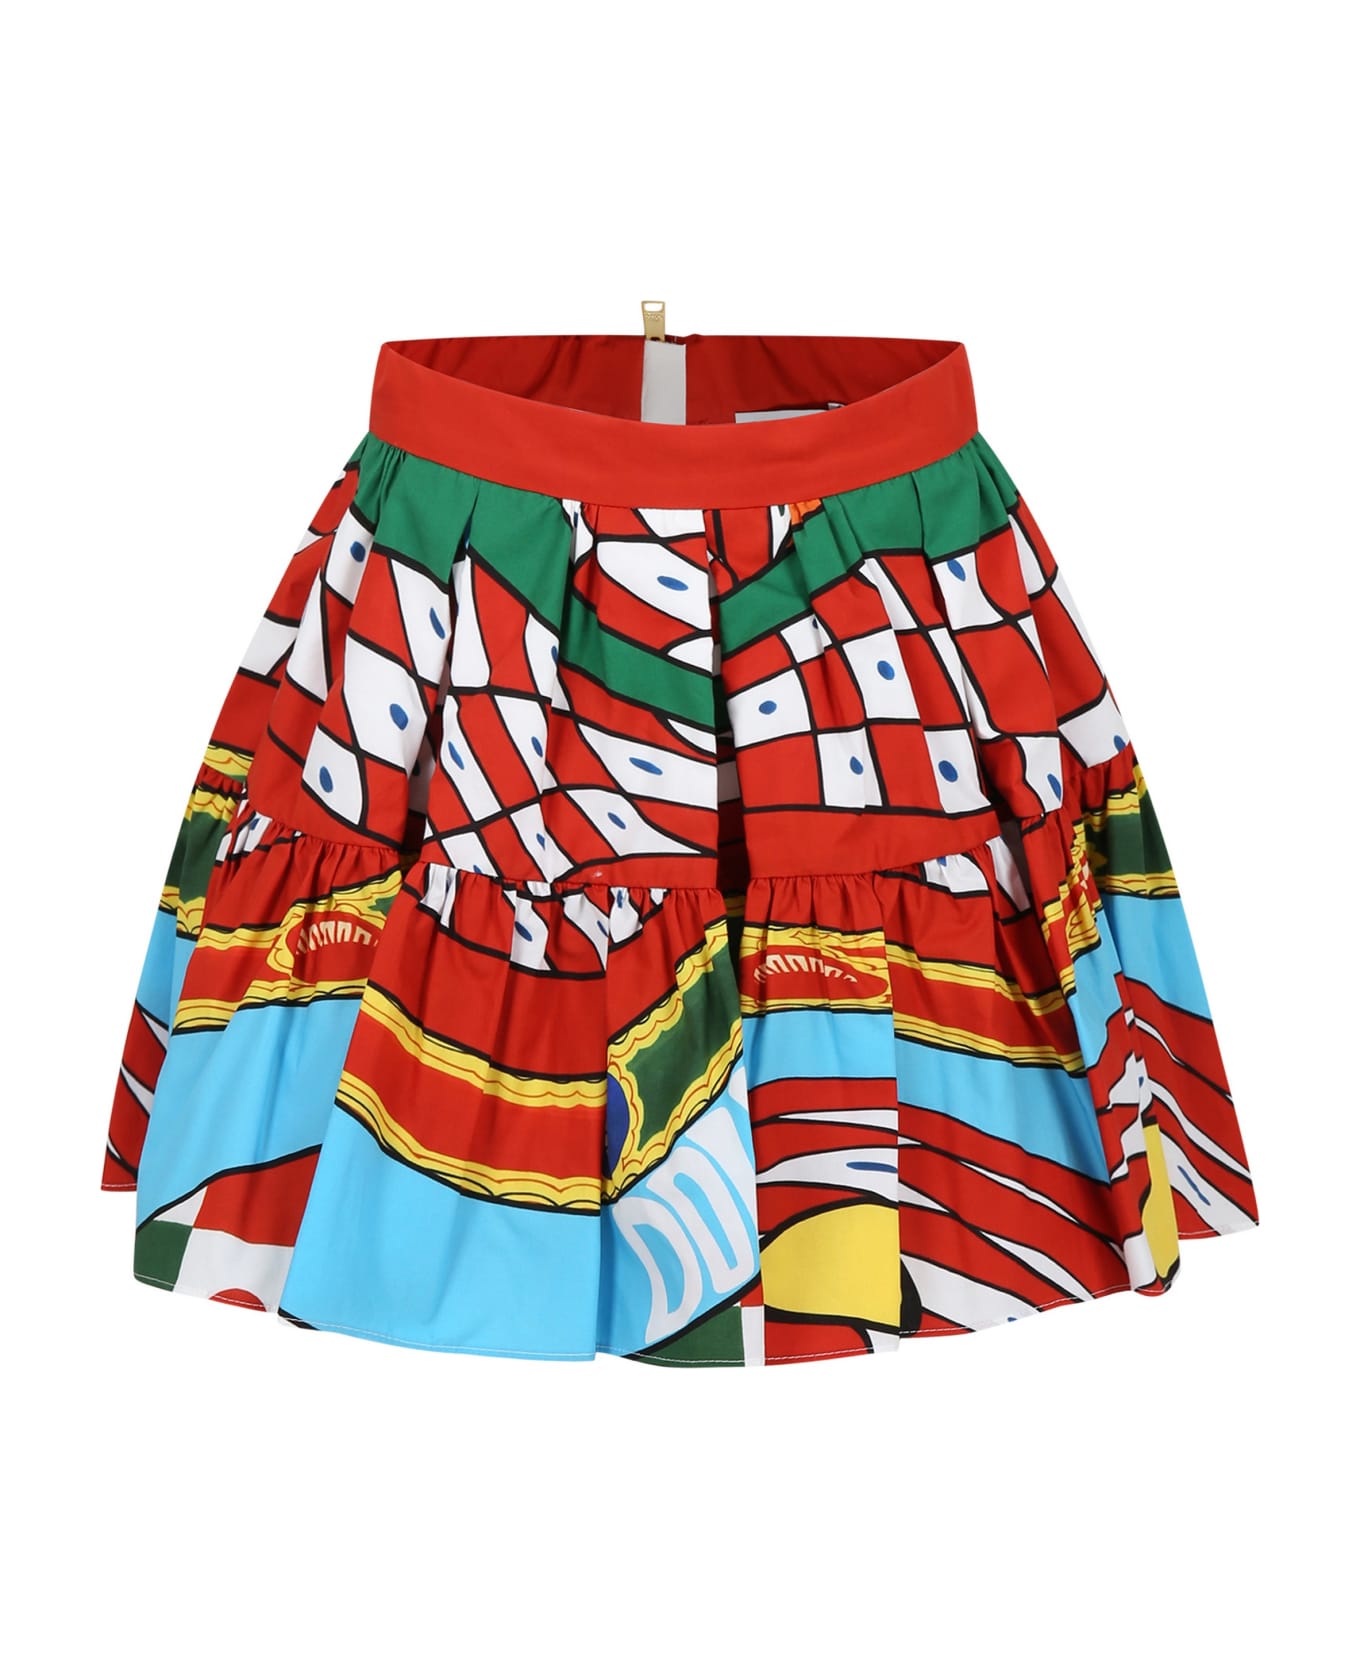 Dolce & Gabbana Red Skirt For Girl With Logo And Cart Print - Multicolor